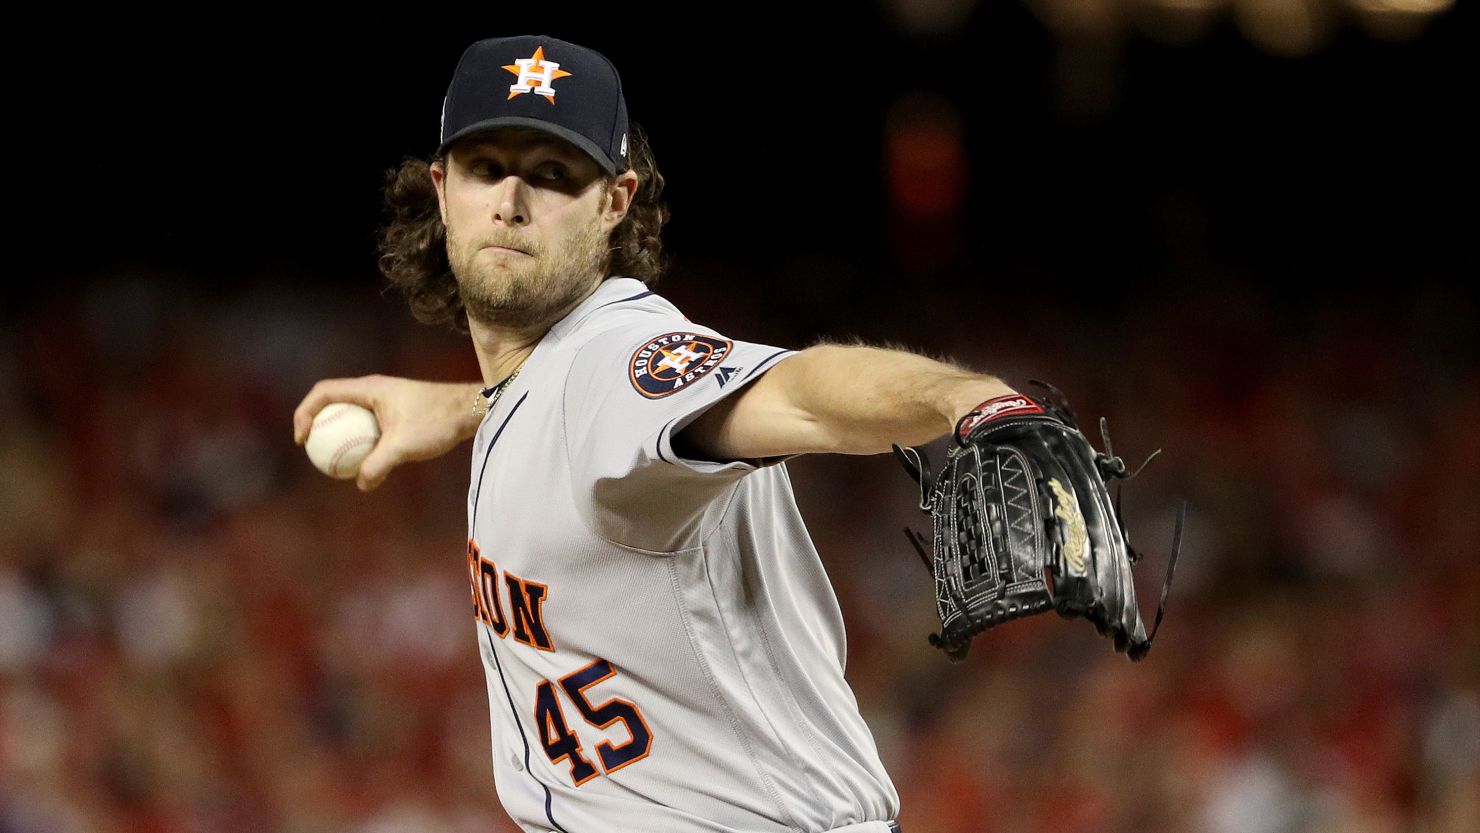 Houston Astros pitcher Gerrit Cole was on the mound when two women exposed themselves Sunday.